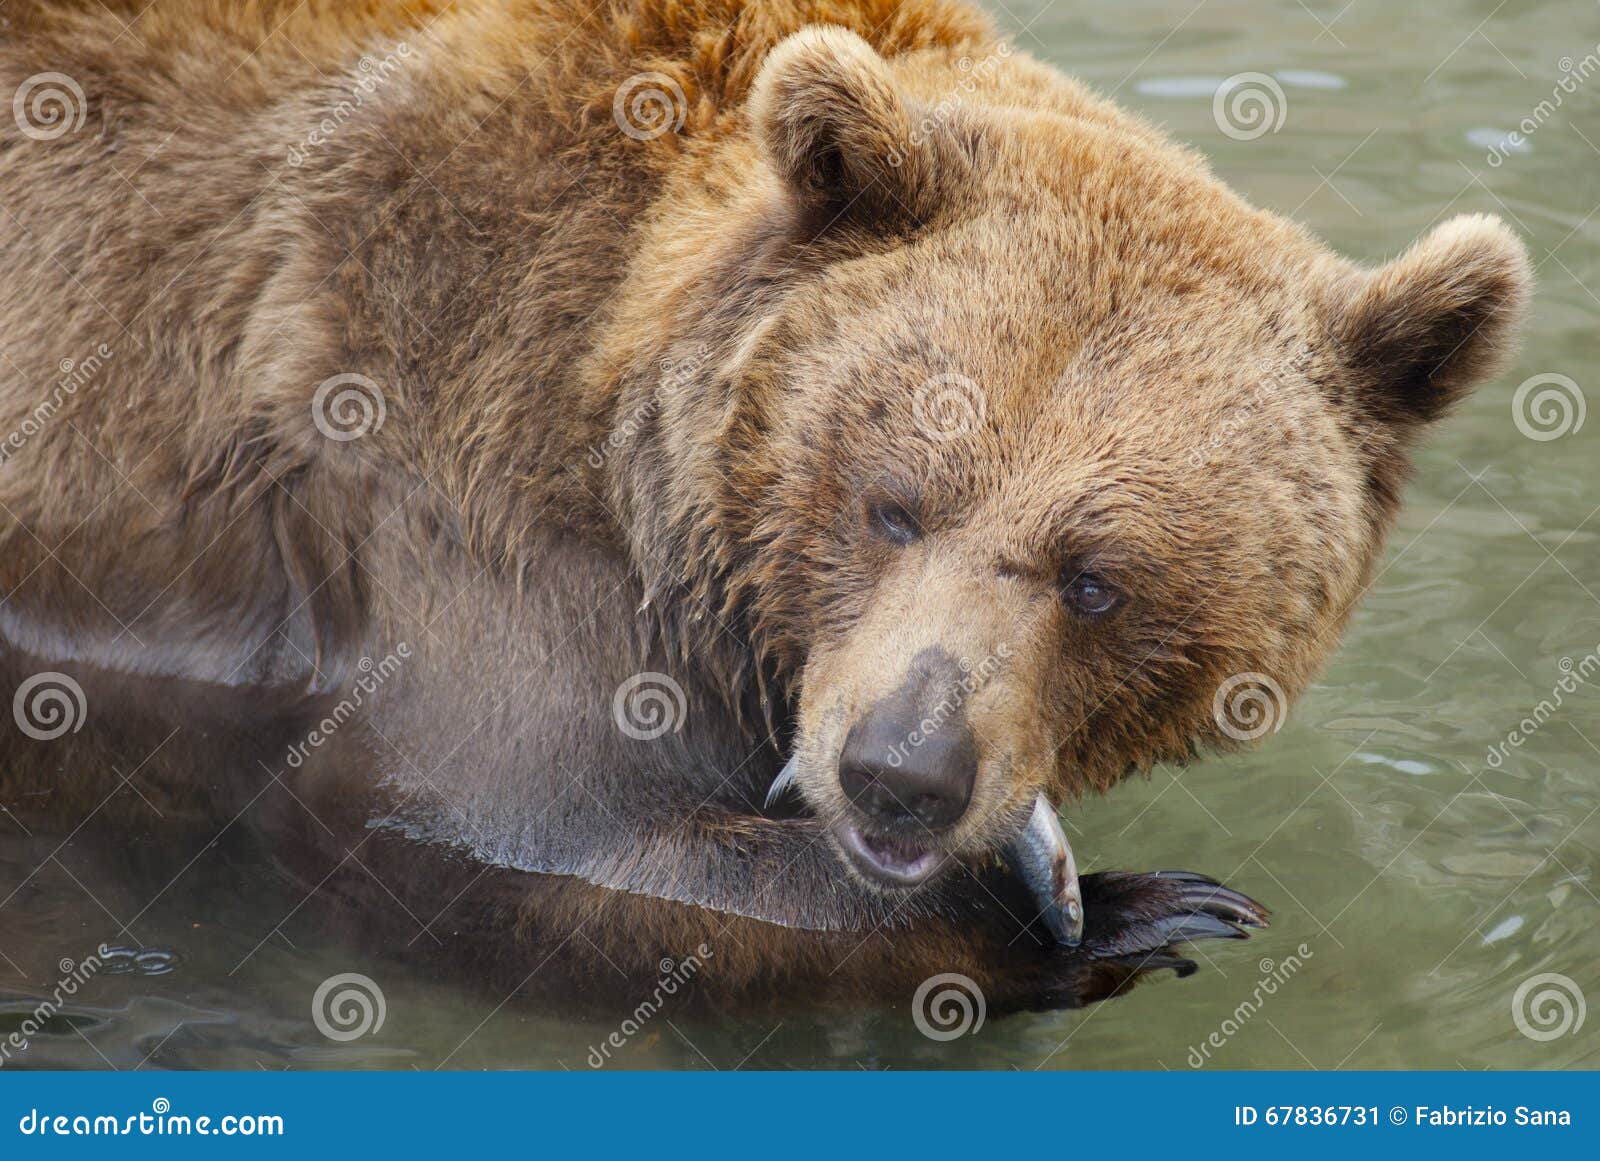 Brown bear at dinner time. Bear eat a little fish in a